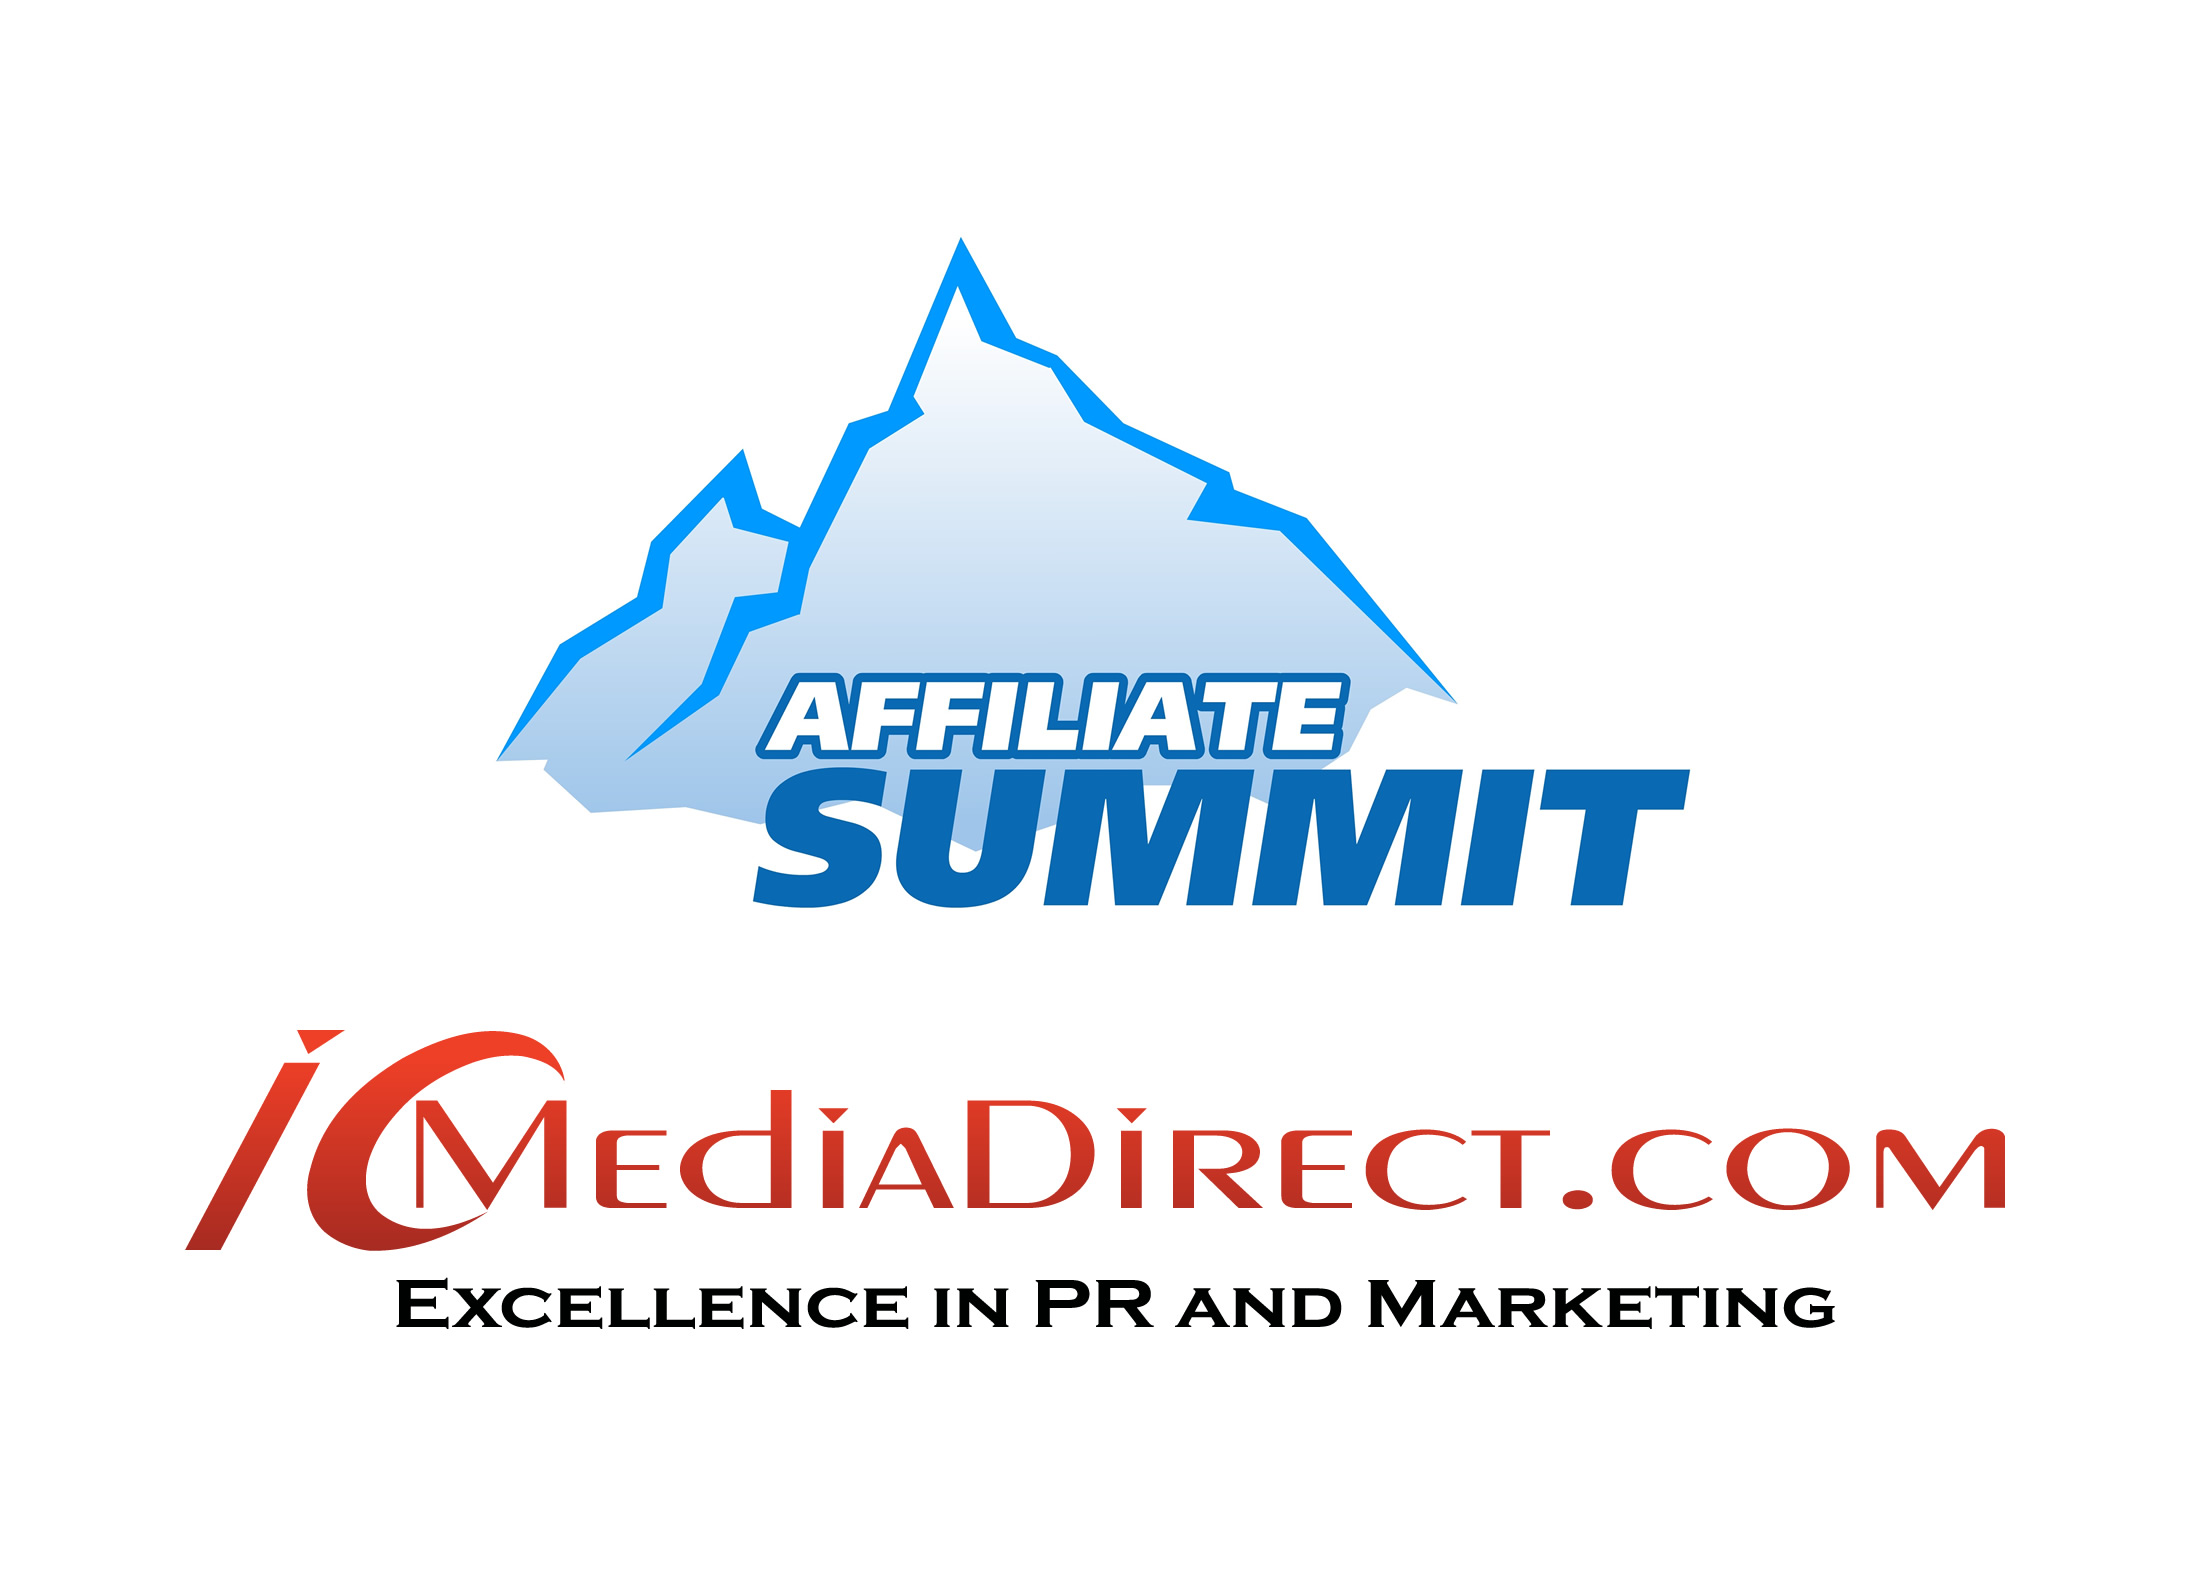 ICMediaDirect Help Brands Stay Abreast Of Their Digital Reputation